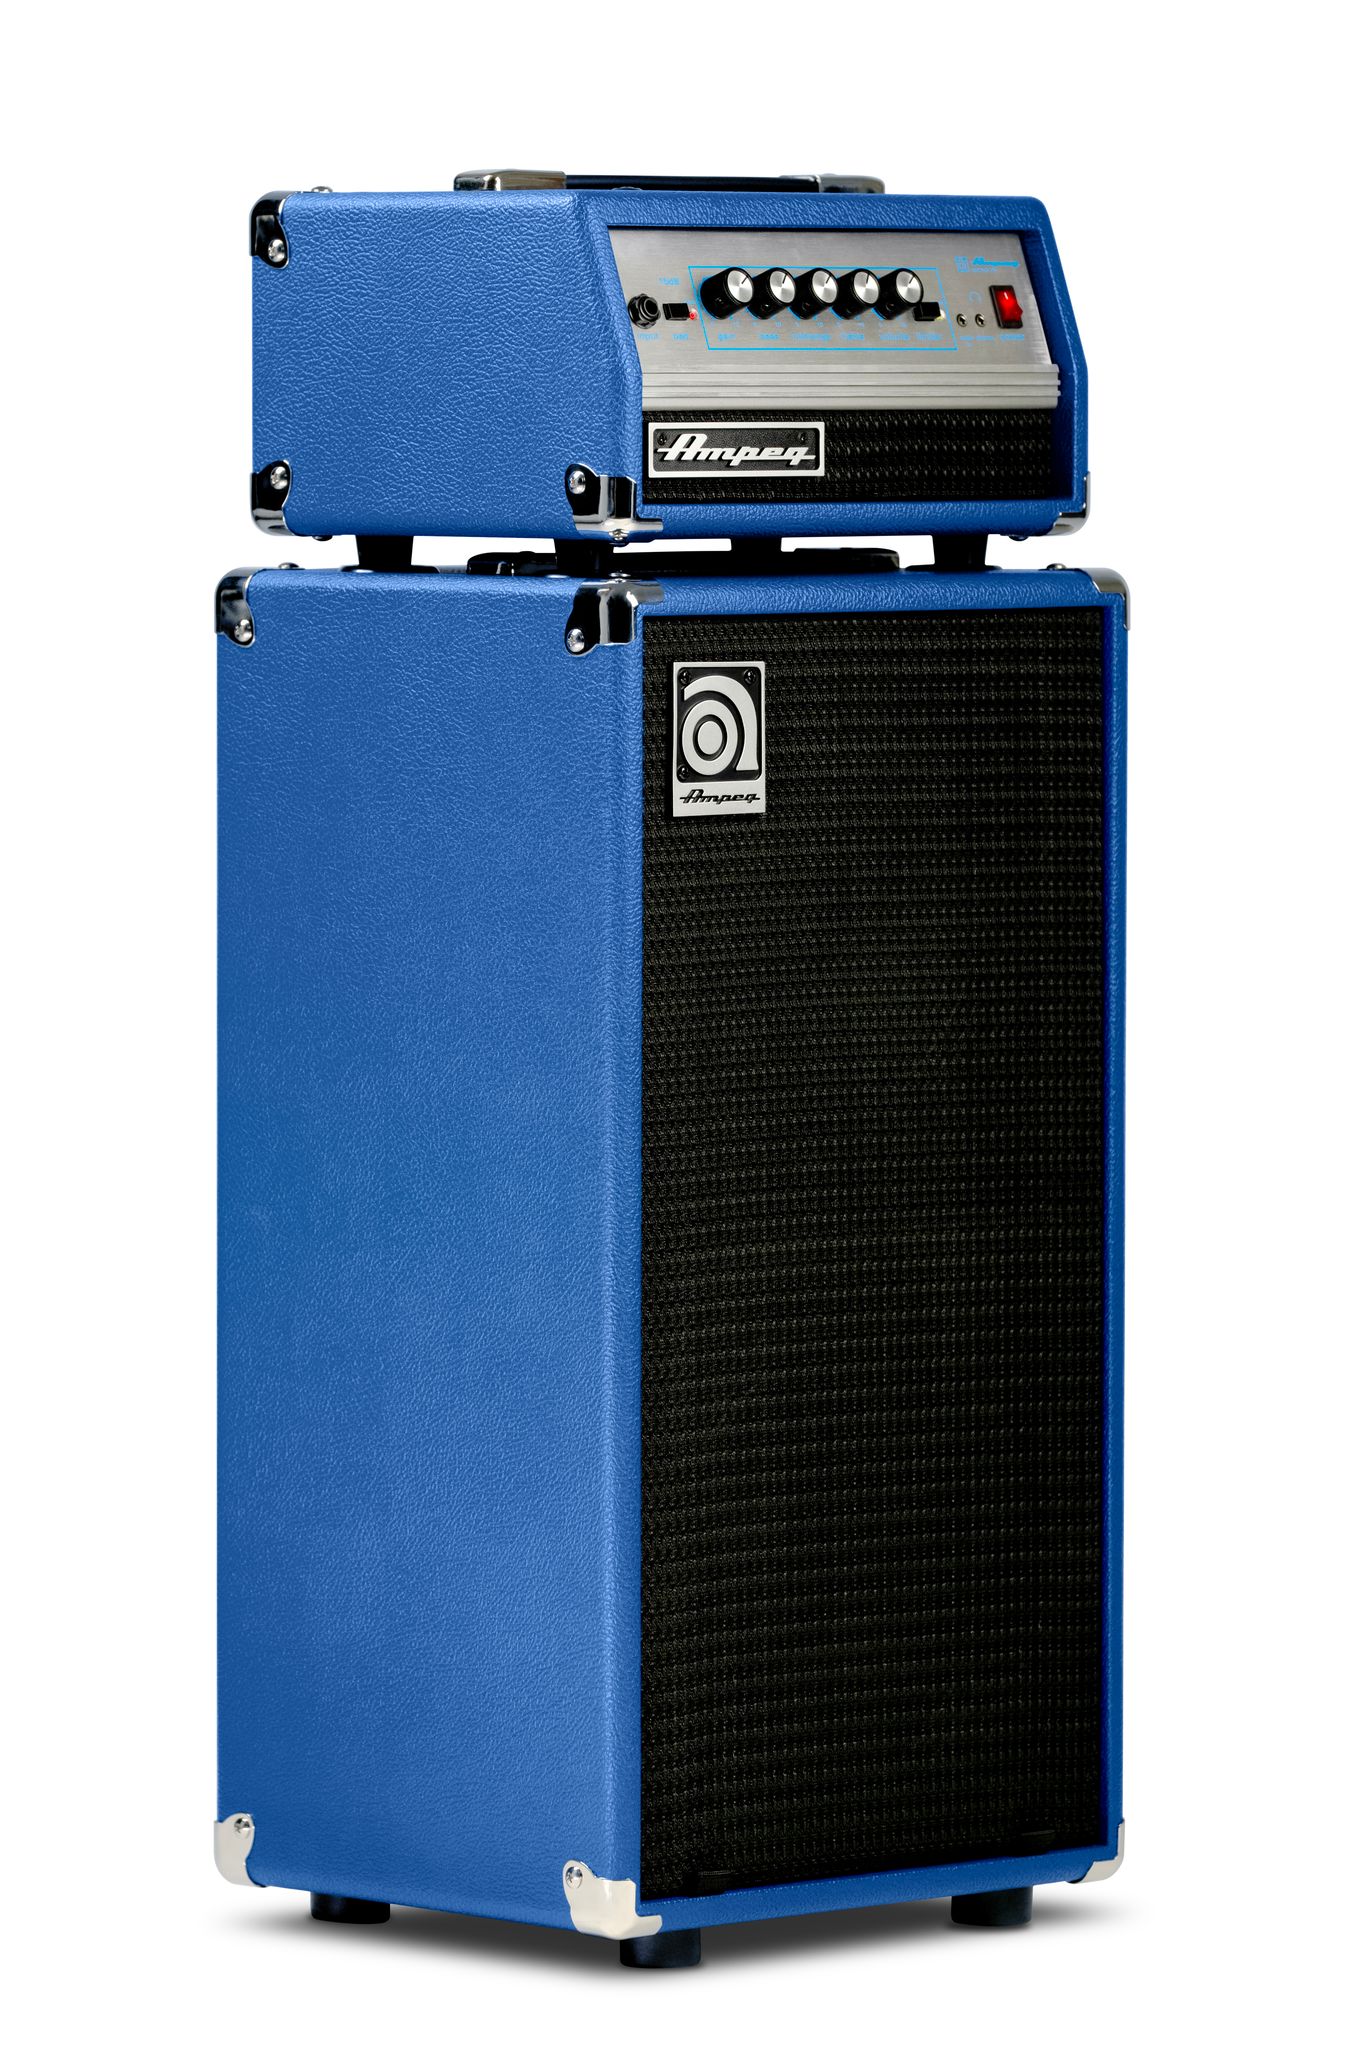 Ampeg Micro Vr Stack Blue Limited Edition 2x10 200w - Bass amp stack - Variation 1